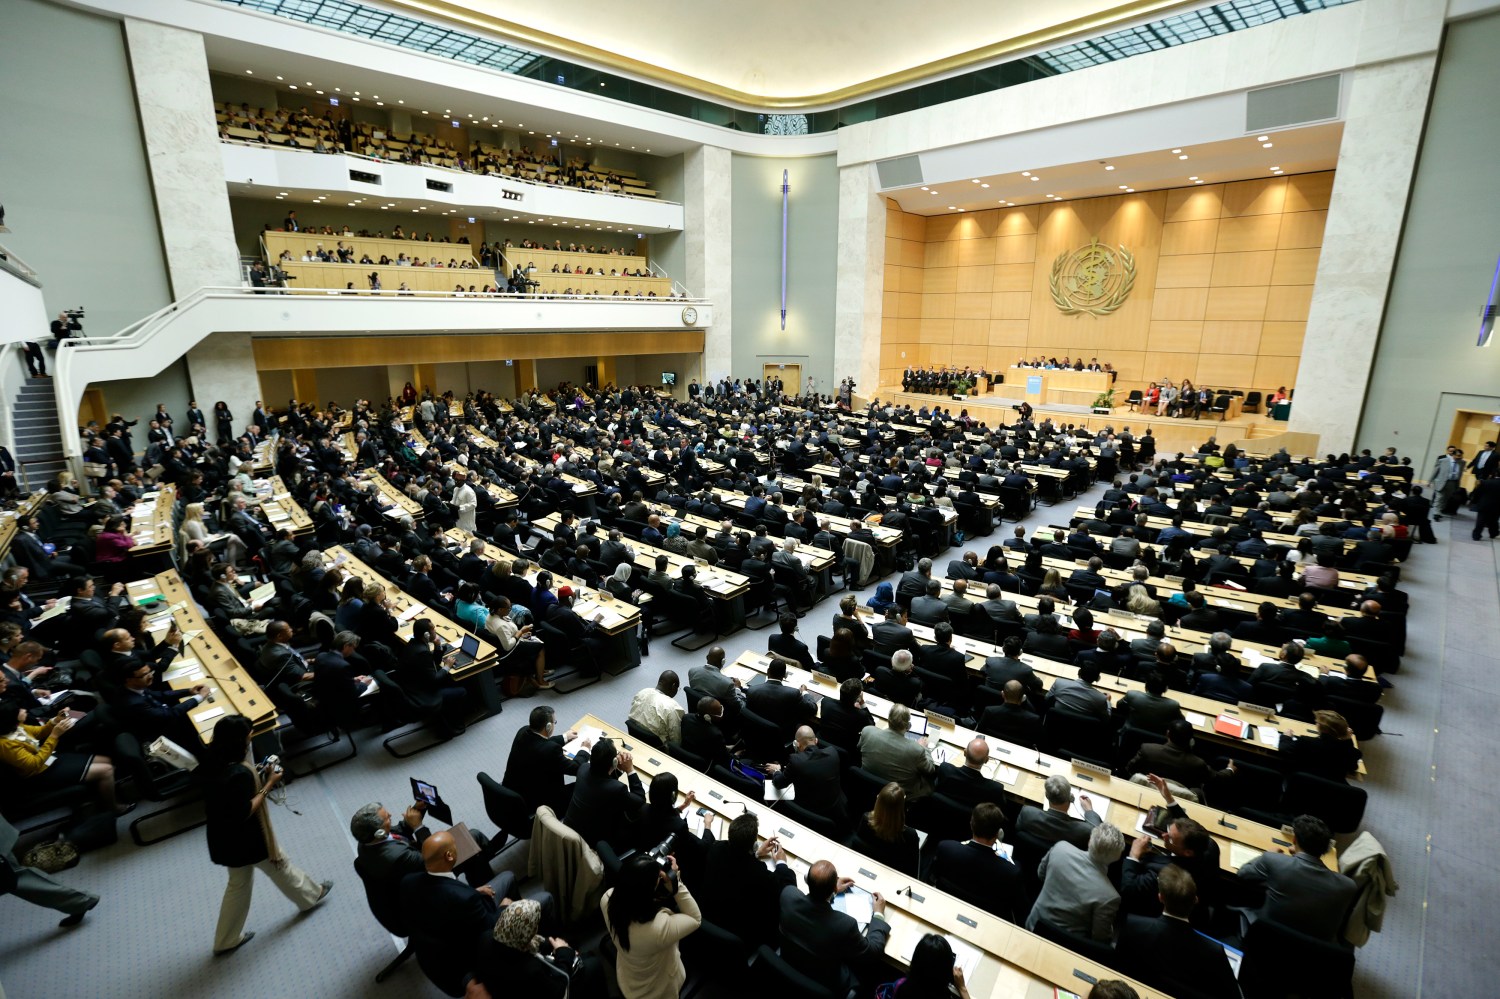 A general view of the 66th World Health Assembly at the United Nations European headquarters in Geneva May 20, 2013. The World Health Assembly is the annual meeting of the World Health Organization's (WHO) 194 Member States and is its highest decision-making body. This year marks the 66th World Health Assembly